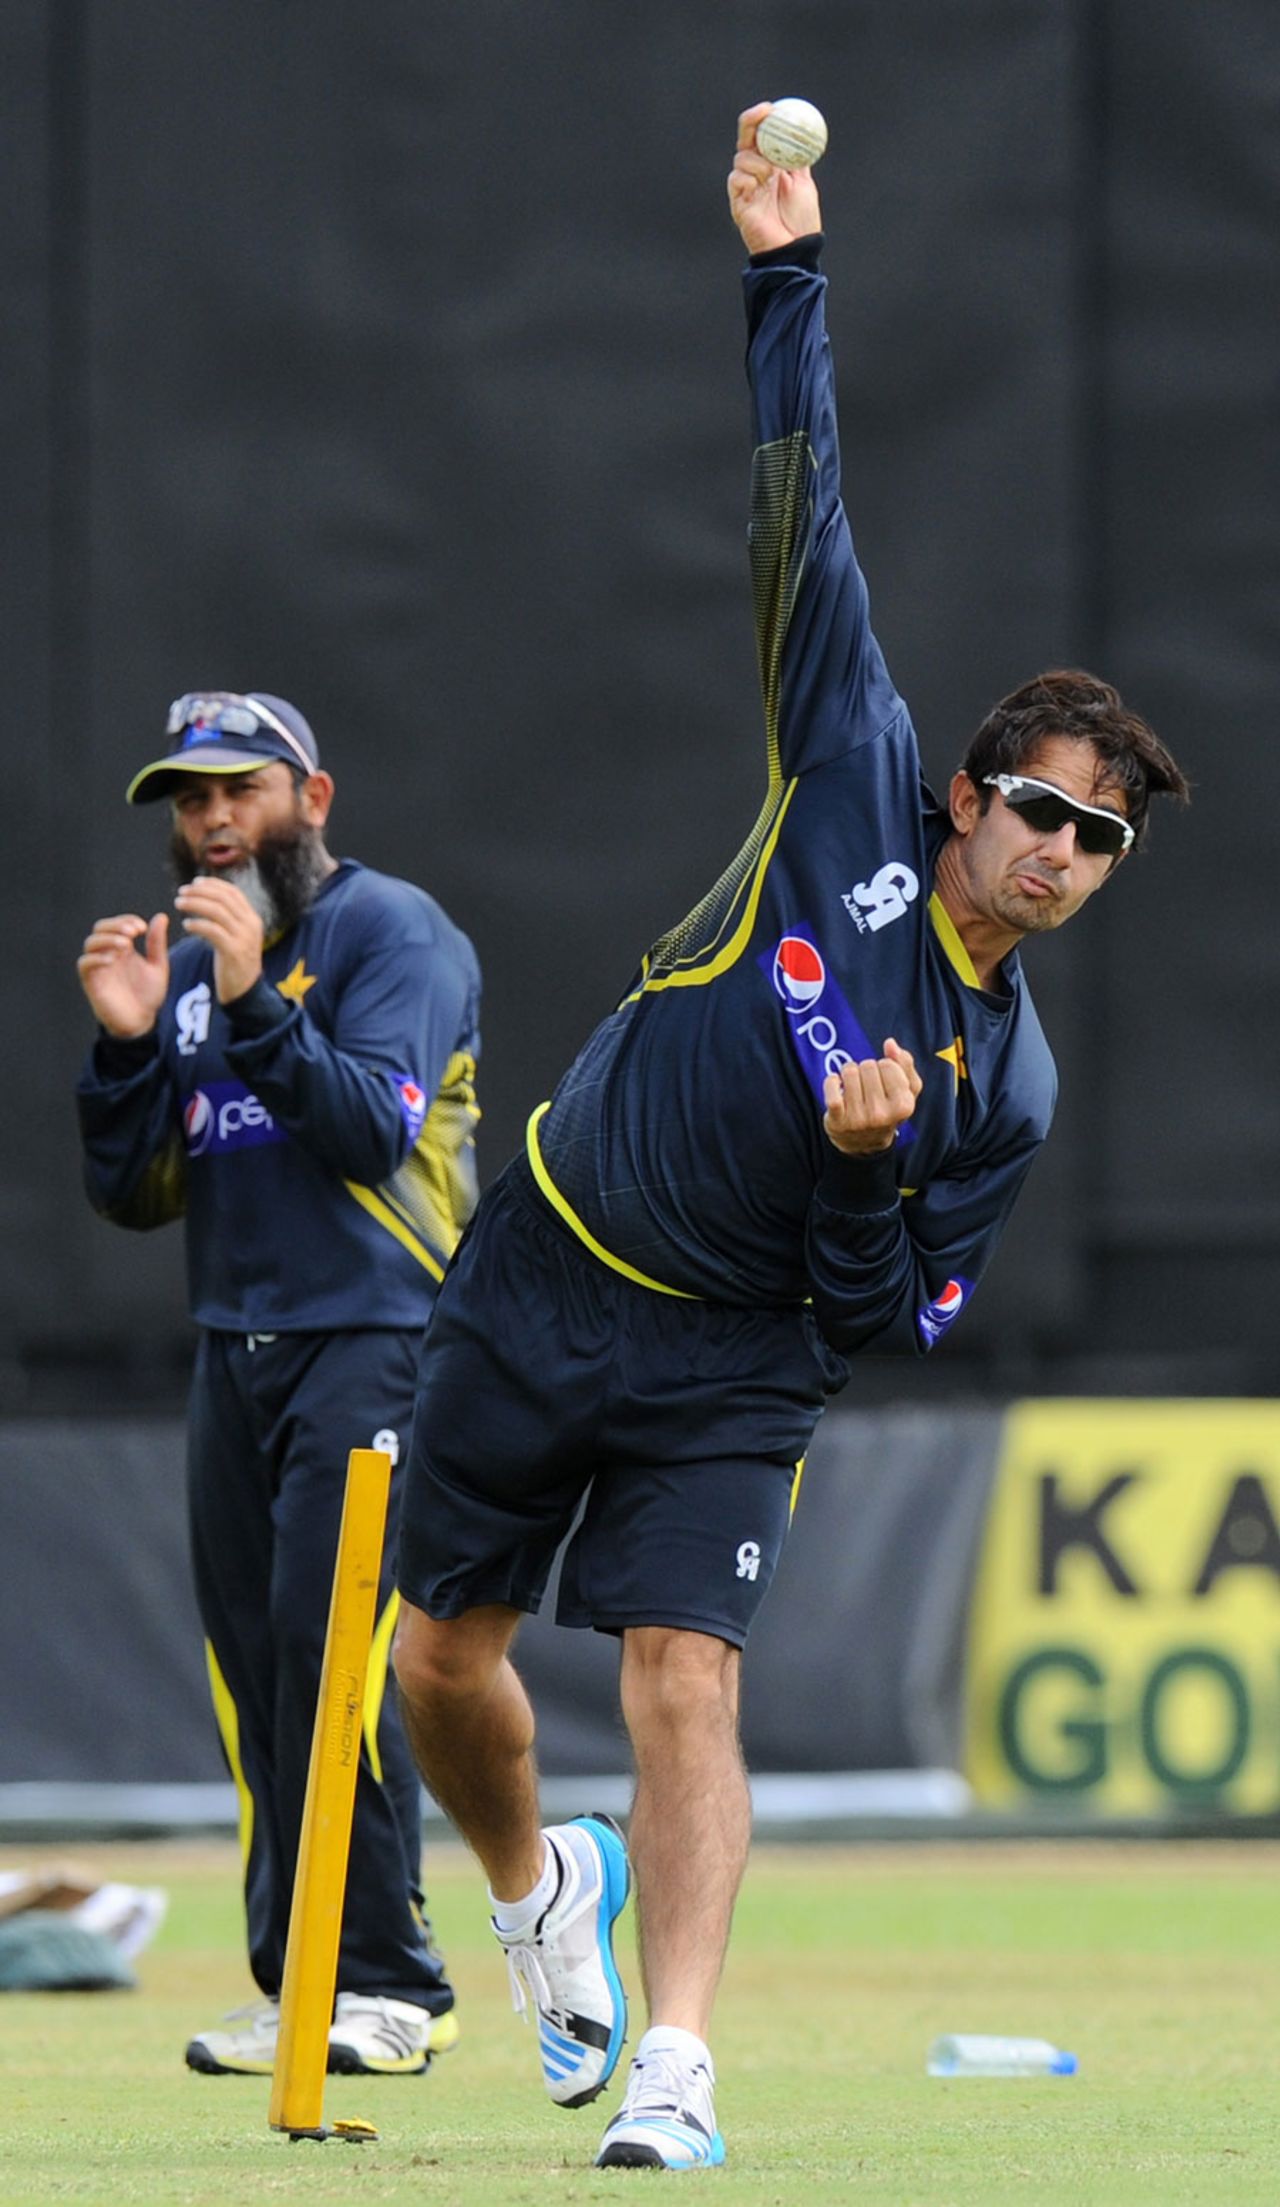 Saeed Ajmal was back in training after returning from Brisbane where he had his action tested, Dambulla, August 29, 2014